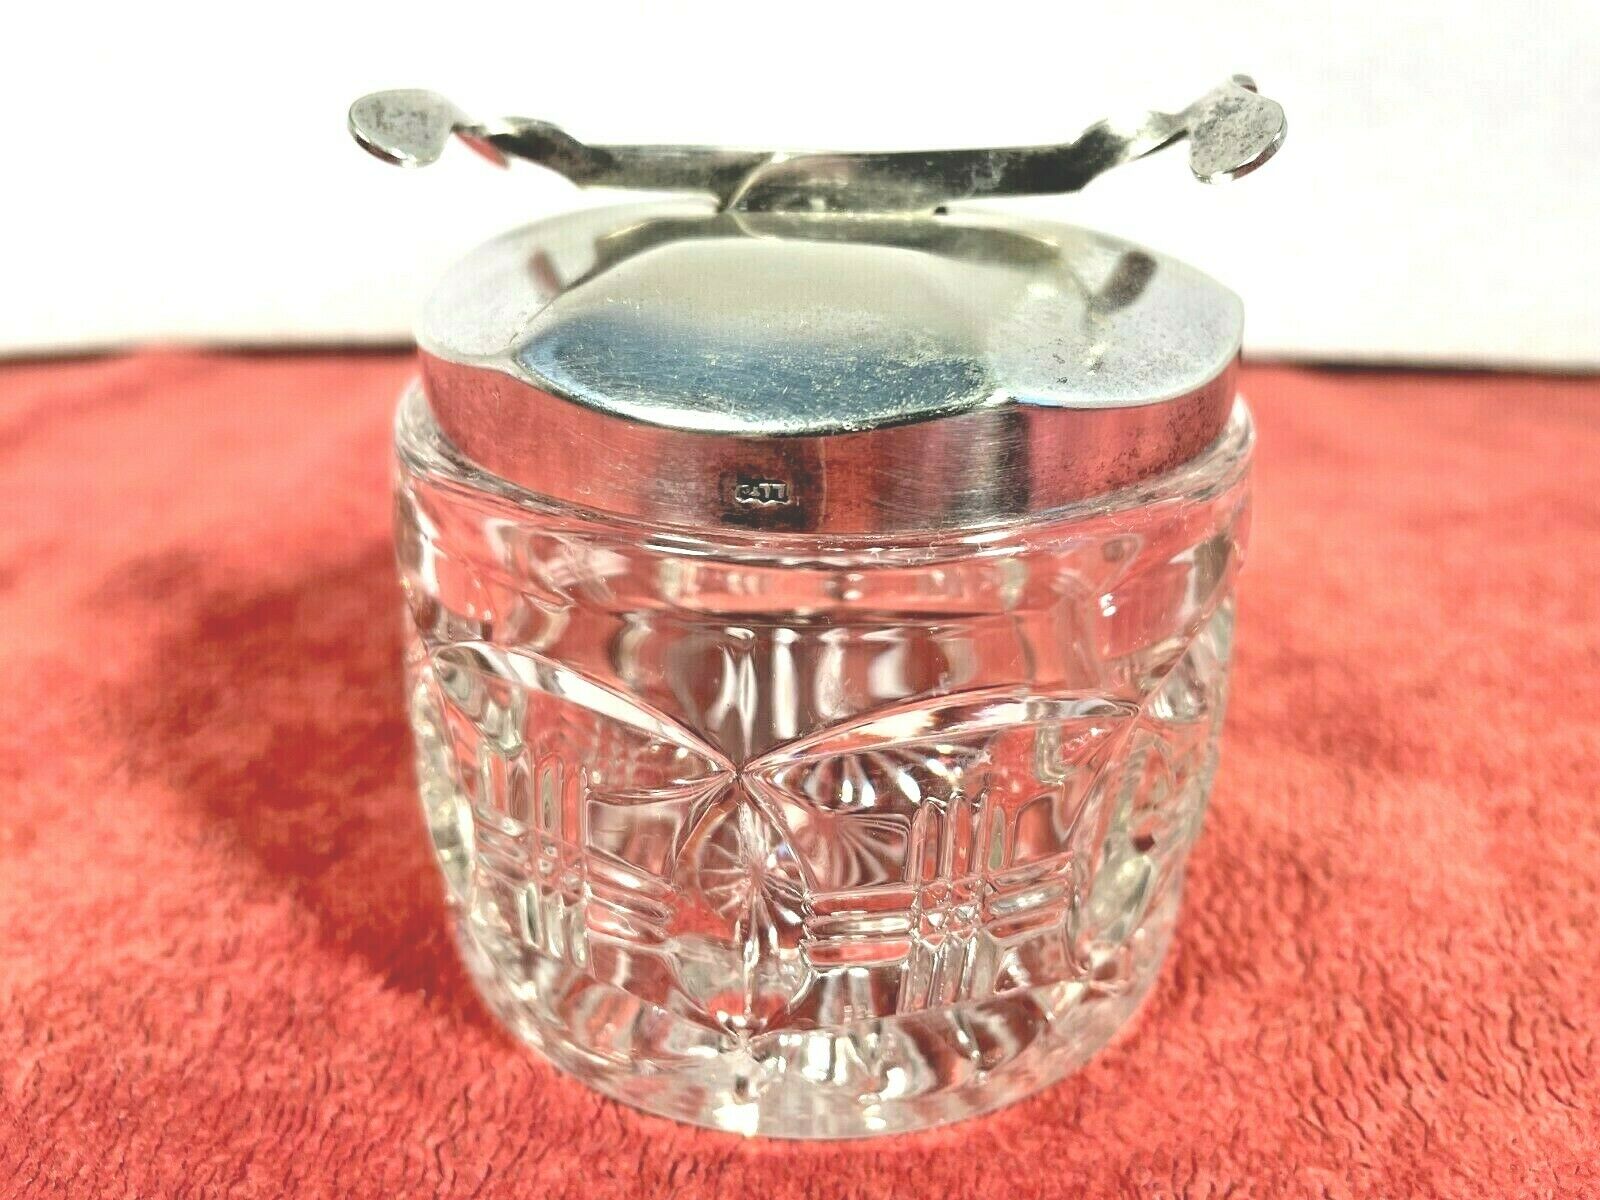 1880s Unique  Glass  Sugar Cube Bowl With Pincher Tongs In Lid  Made In England